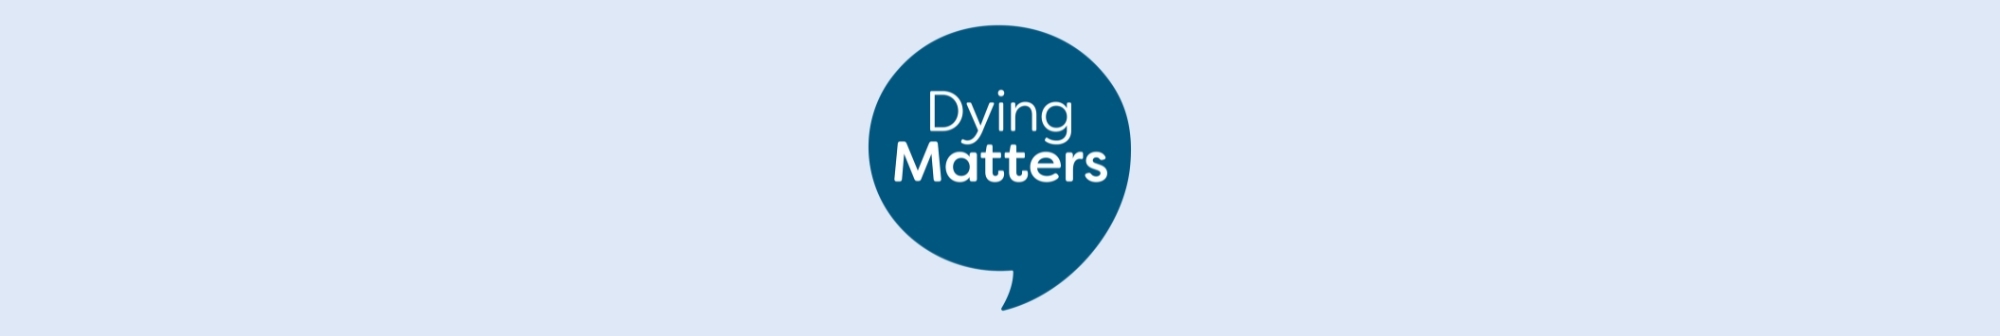 the-words-dying-matters-inside-a-speech-bubble